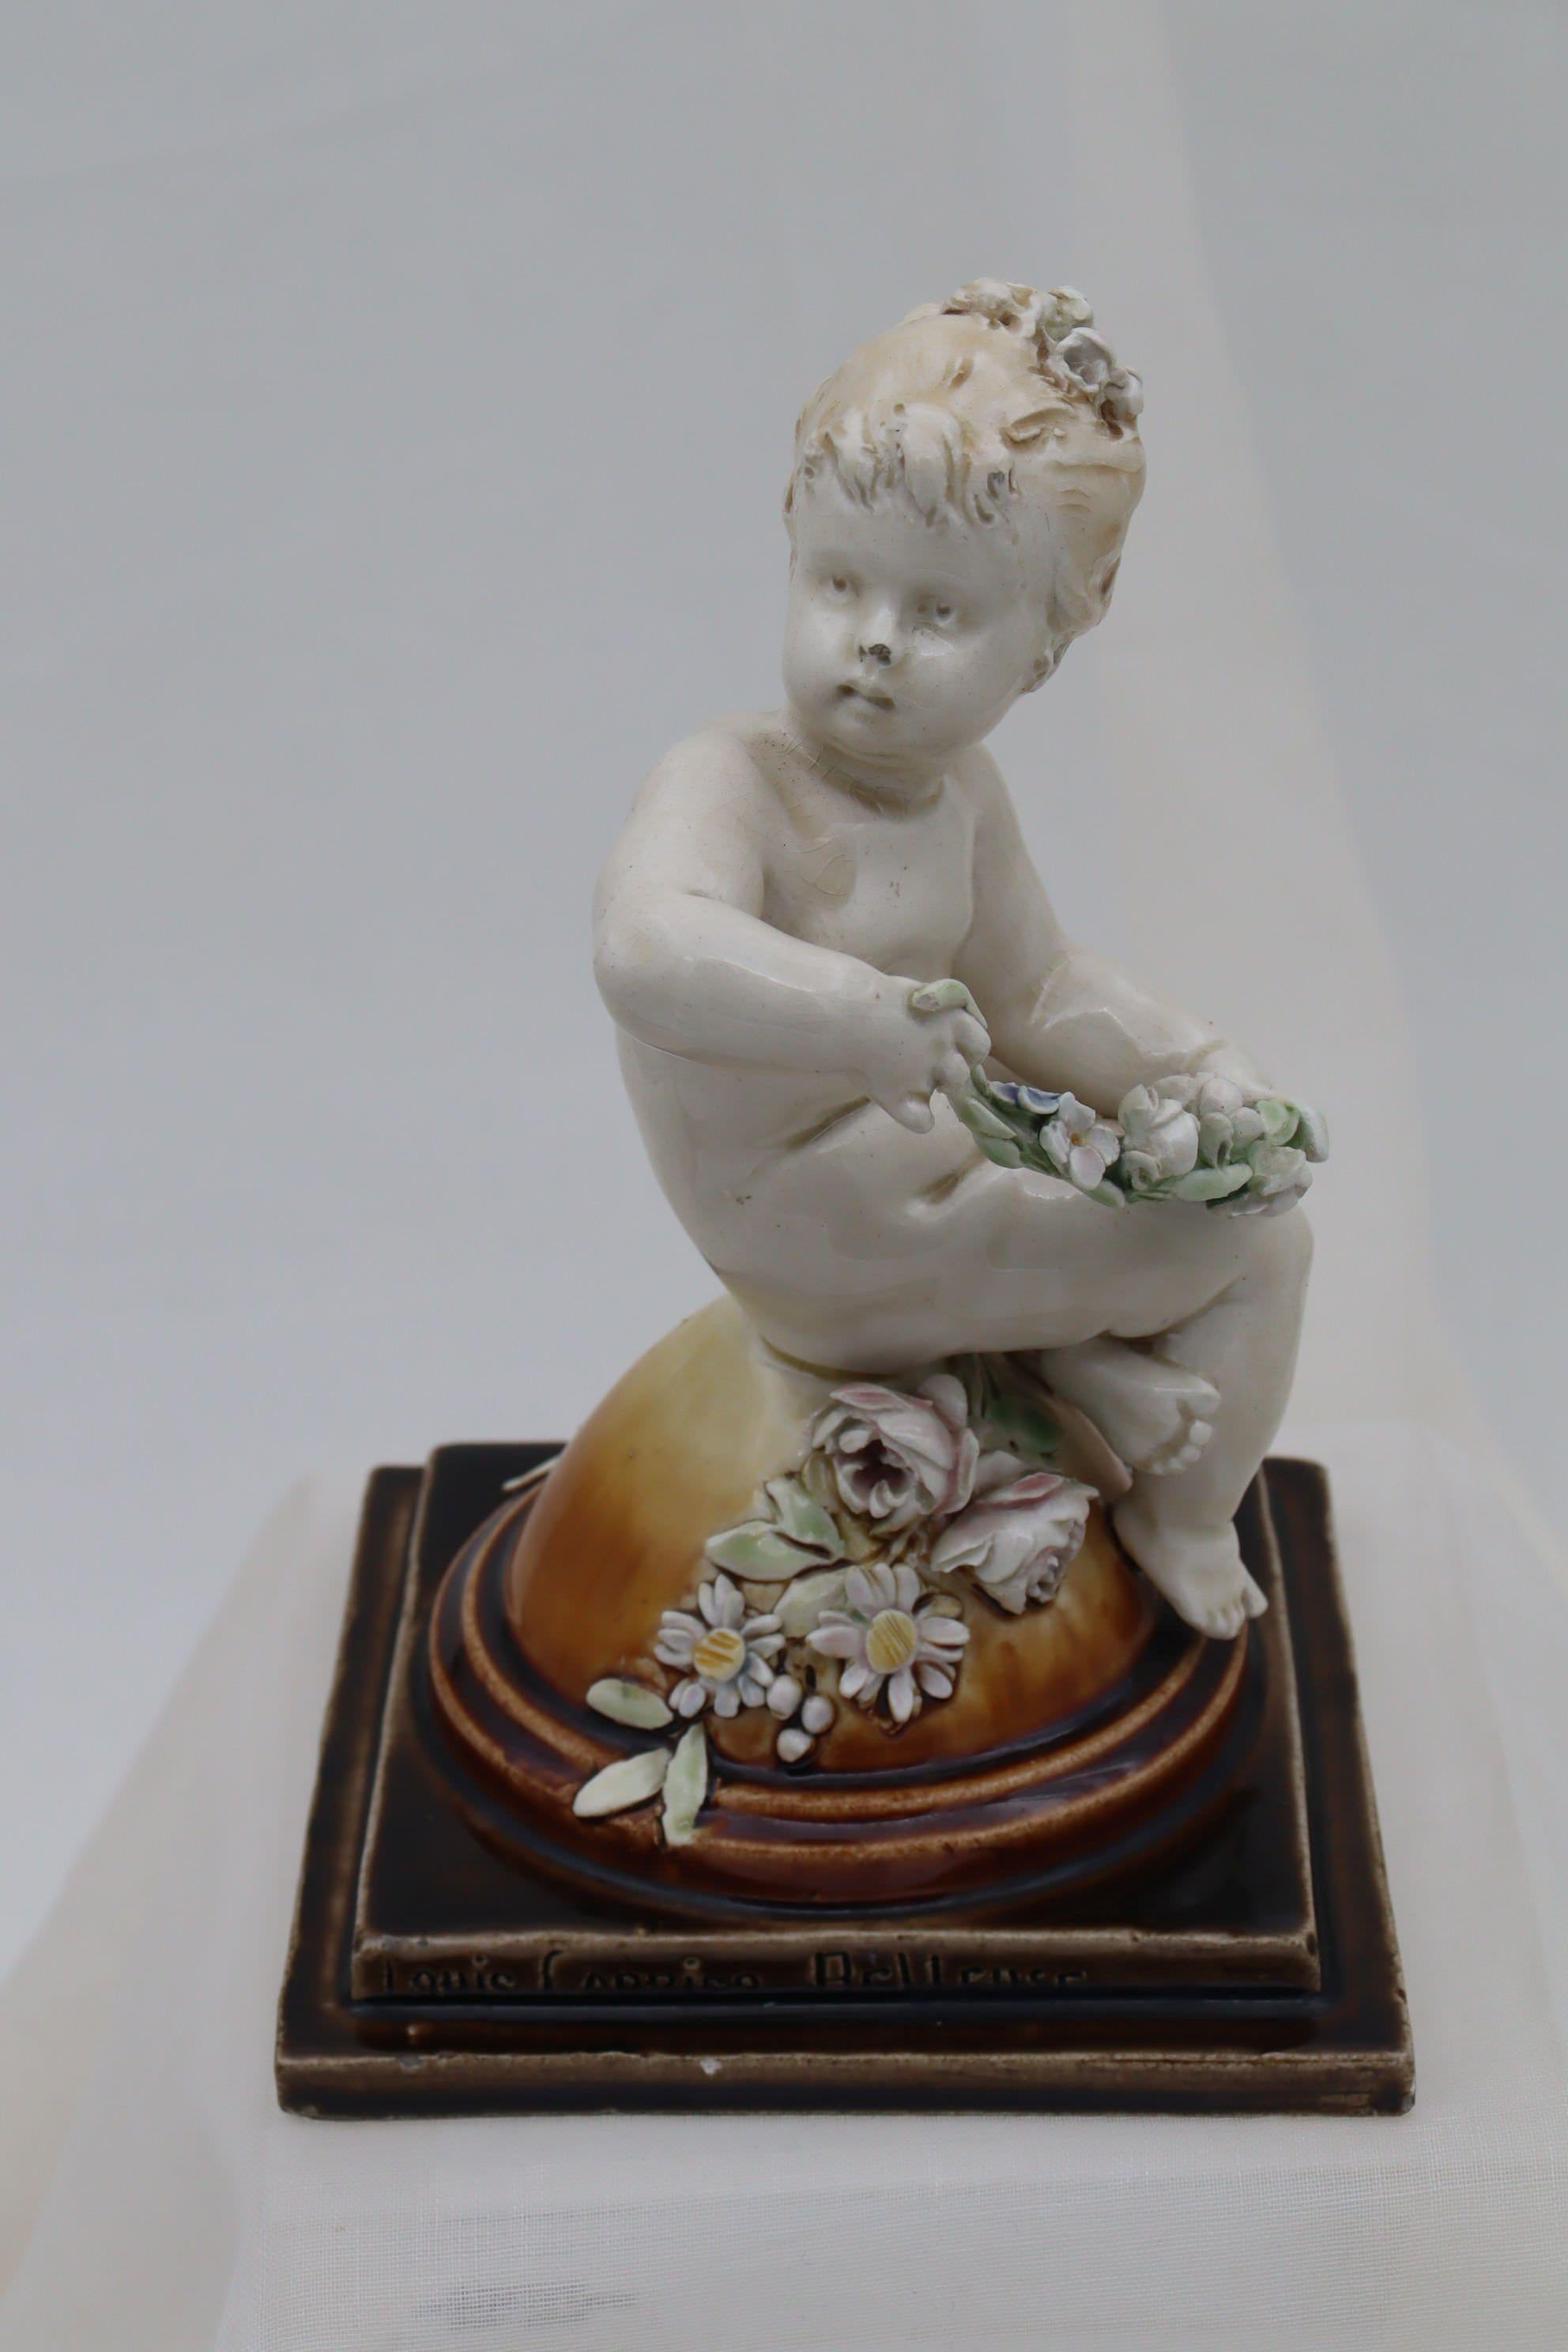 This cherub figurine was modelled by Louis Carrier-Belleuse (1848-1913) for the Choisy du Roi factory. The cherub is seated cross-legged on a dome, and holds a swag of flowers while another spray of flowers rests on the dome beneath her. The dome